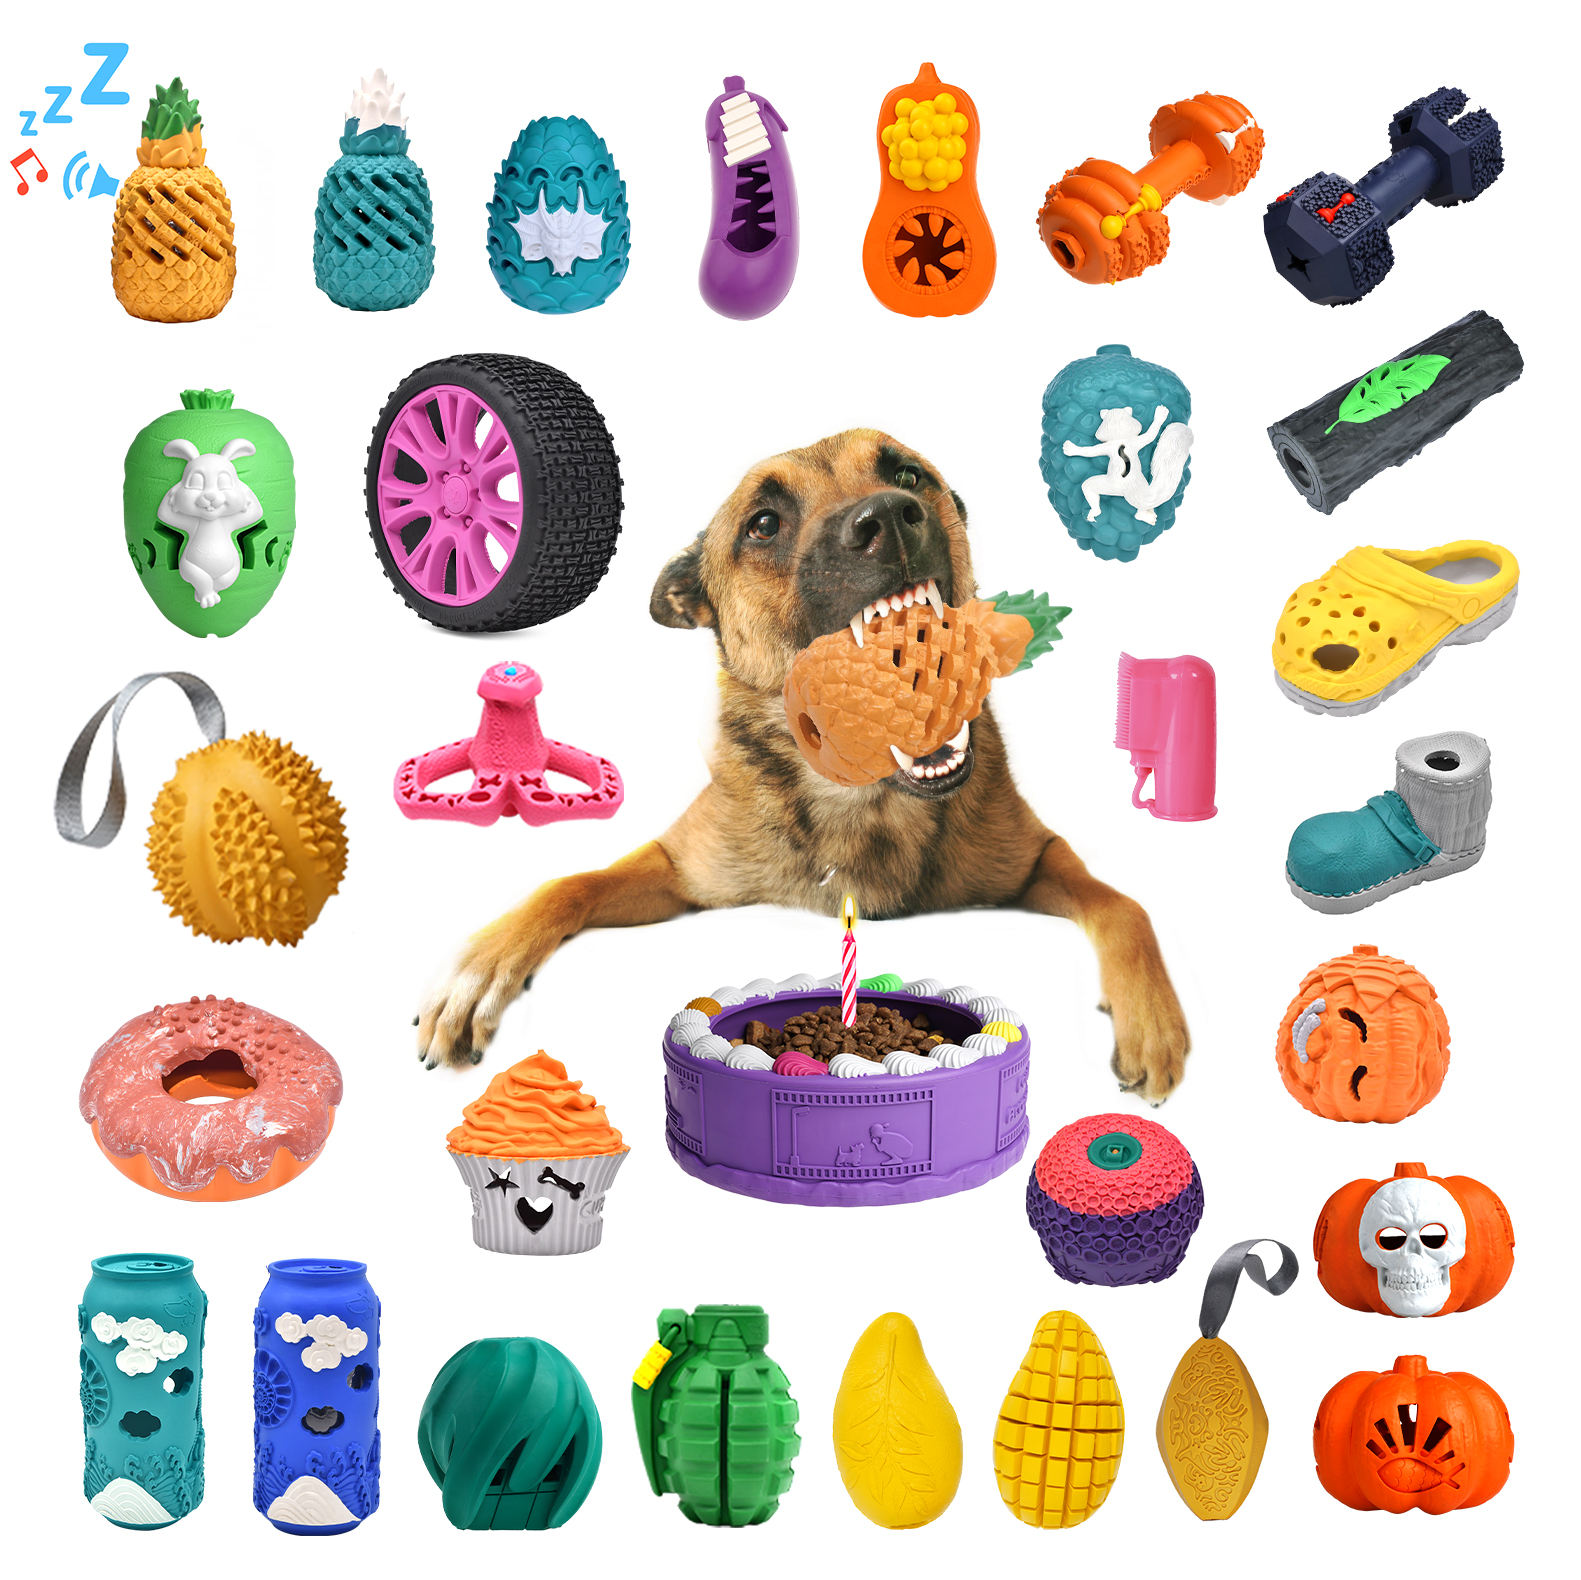 Modern Manufacture Rubber Sport Toy Indestructible Leakage Food Dumbbell Hiding Food Bite Pet Chew Dog Toy Dog Safe Rubber Toy